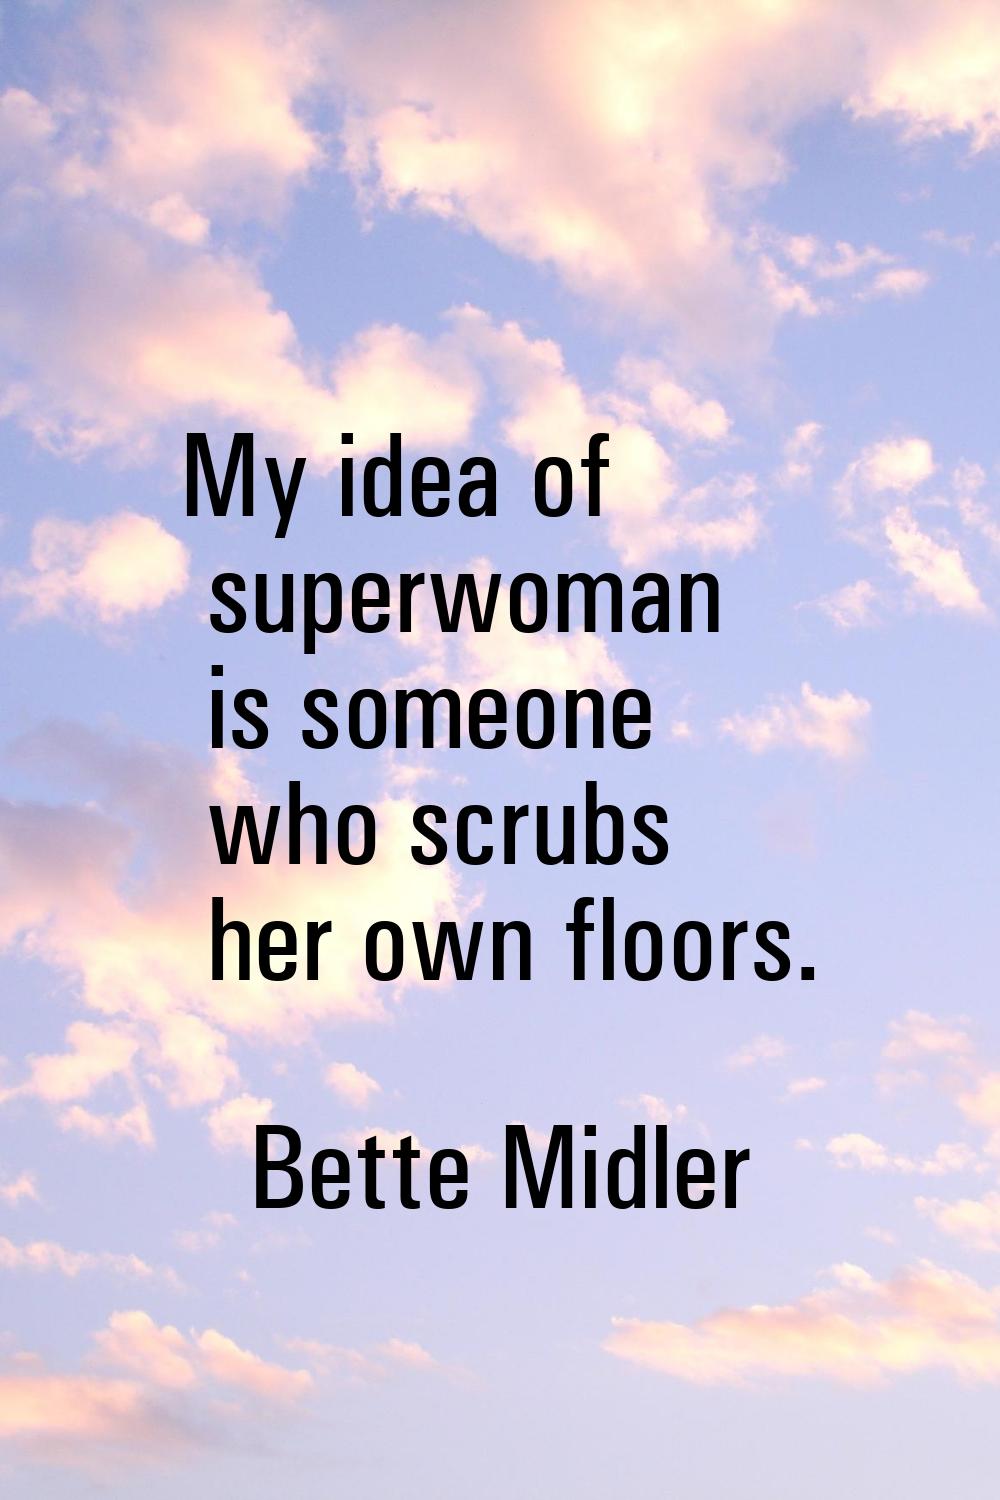 My idea of superwoman is someone who scrubs her own floors.